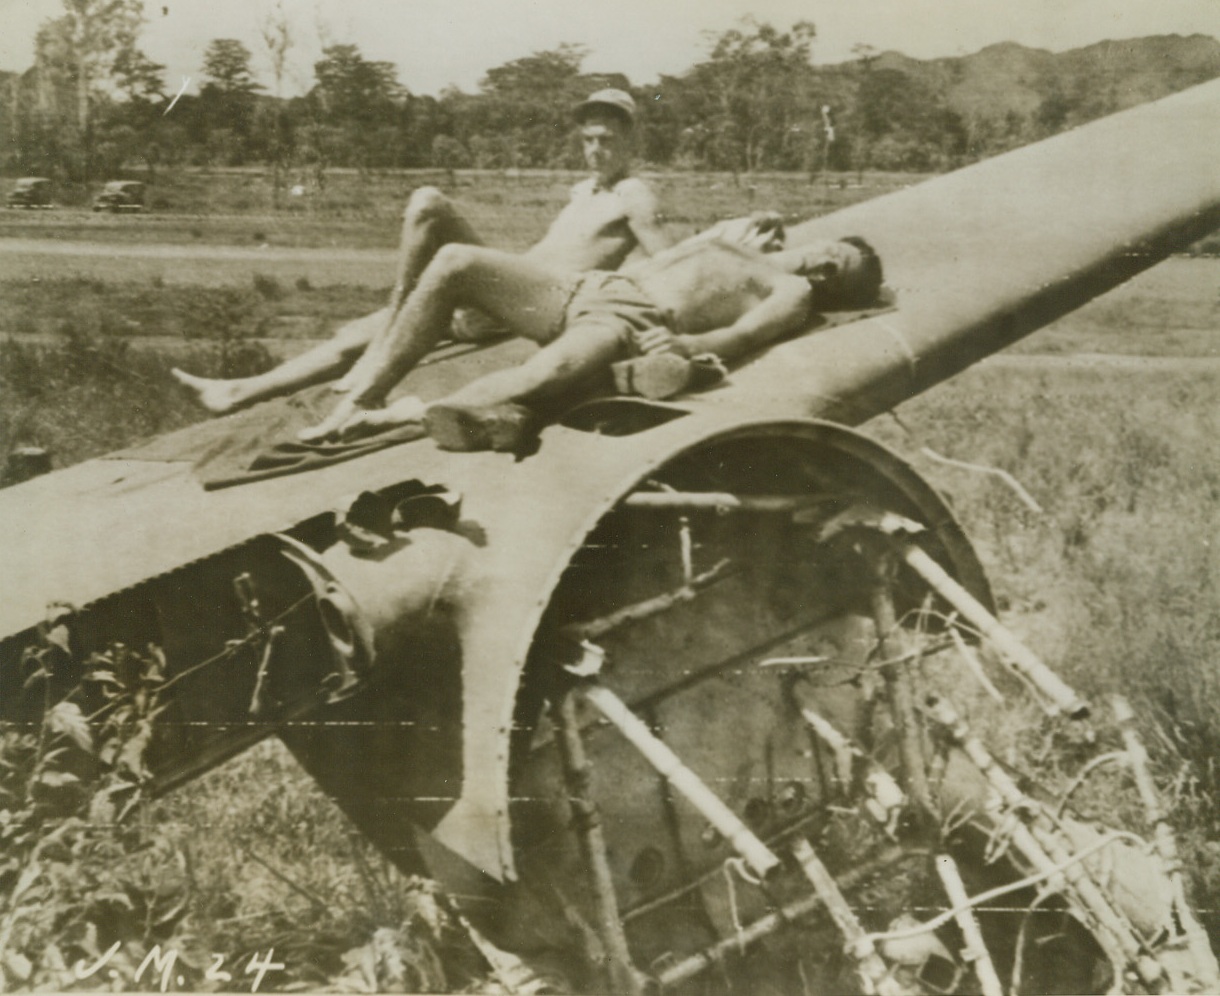 New Guinea Sundeck, 10/19/1943.NEW GUINEA – Between air attacks on Jap bases in the Southwest Pacific area, American Air Force Officers catch up on their sunbathing, stretched out on a crashed bomber on the edge of the jungle.  Left is 1st LT. William Fairbanks, of Glendale, California; Right Capt. Alex Guerry of Sewanee, Tenn.Credit  (ACME Photo by Frank Prist for the War Picture Pool Via ARMY RADIOTELEPHOTO.);